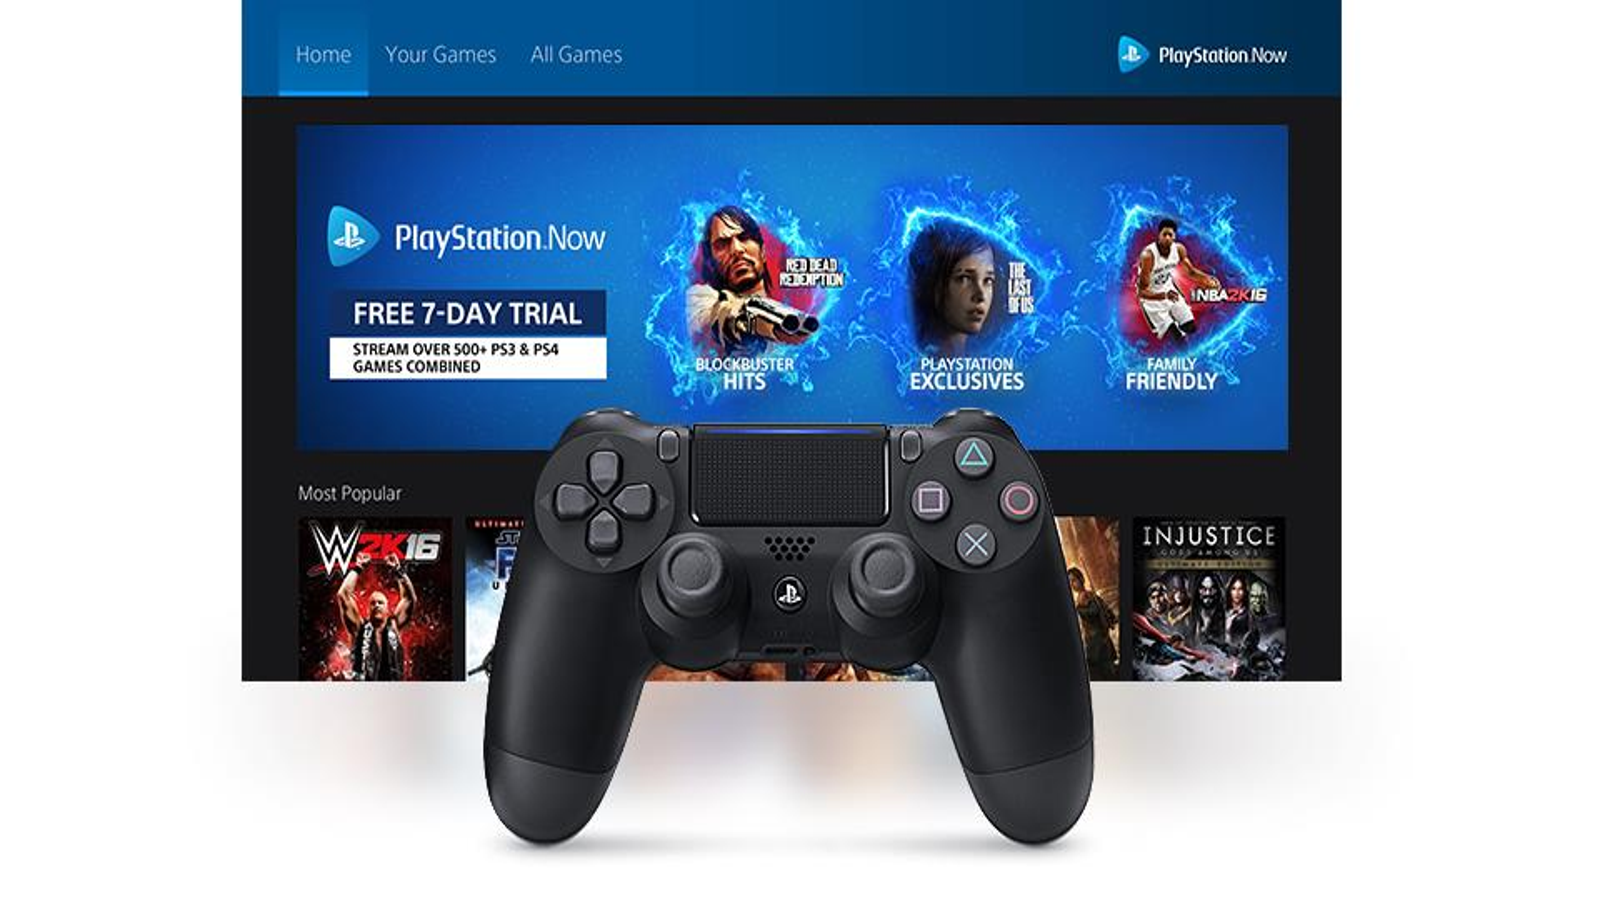 Every PlayStation Now Game - PS4 & PS3 Games Playable on PS Now